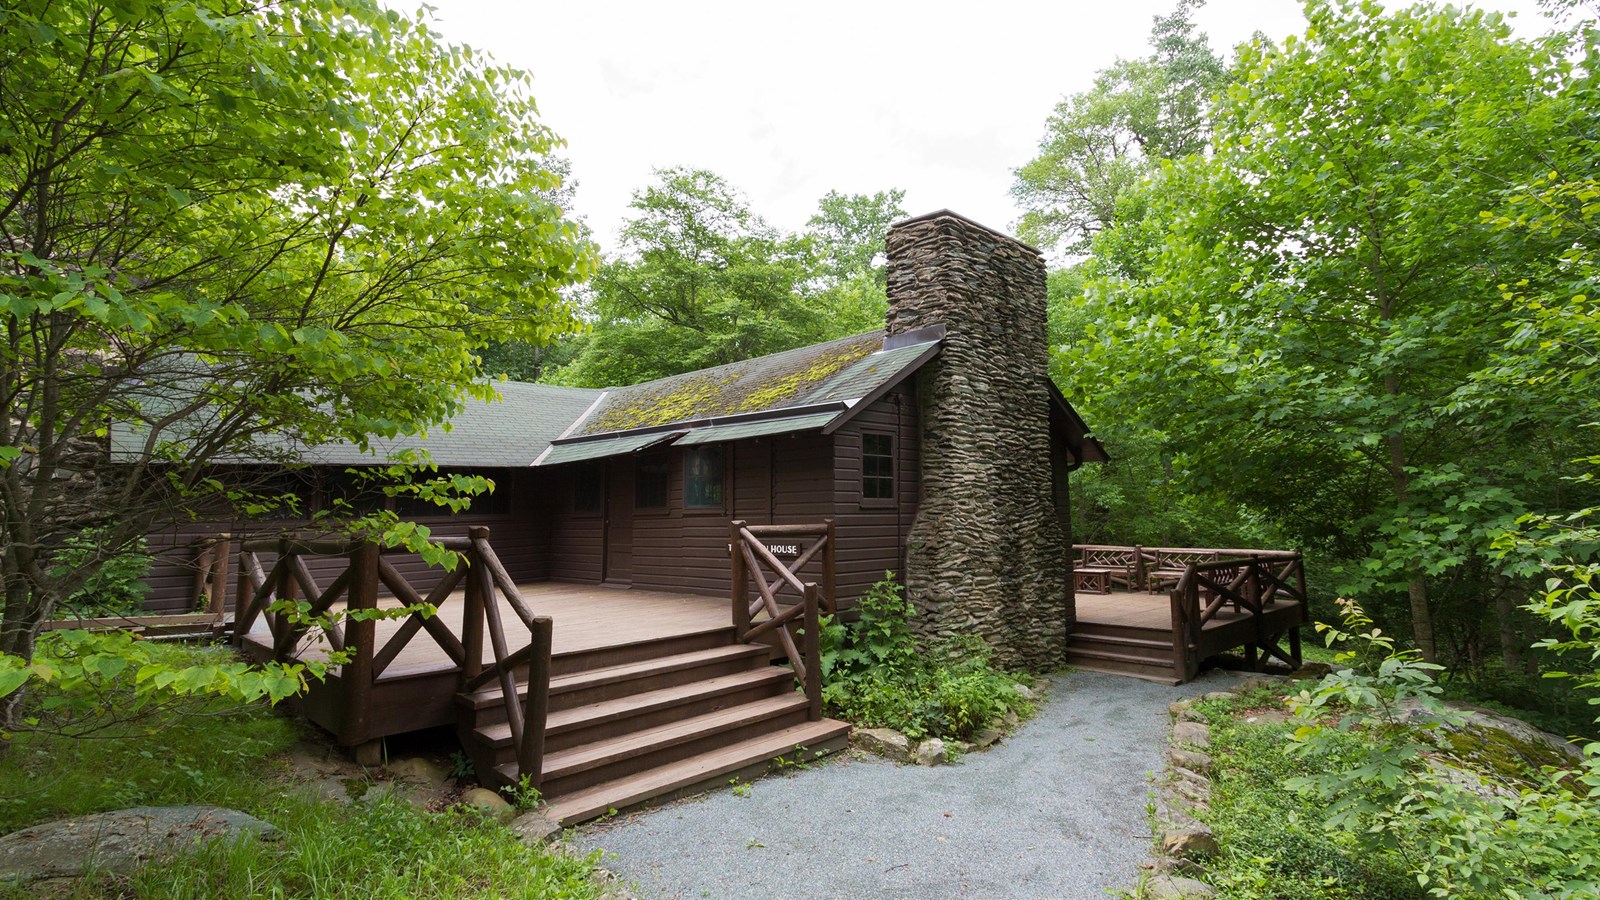 An historic wood cabin with a large porch sits in the middle of a forest.